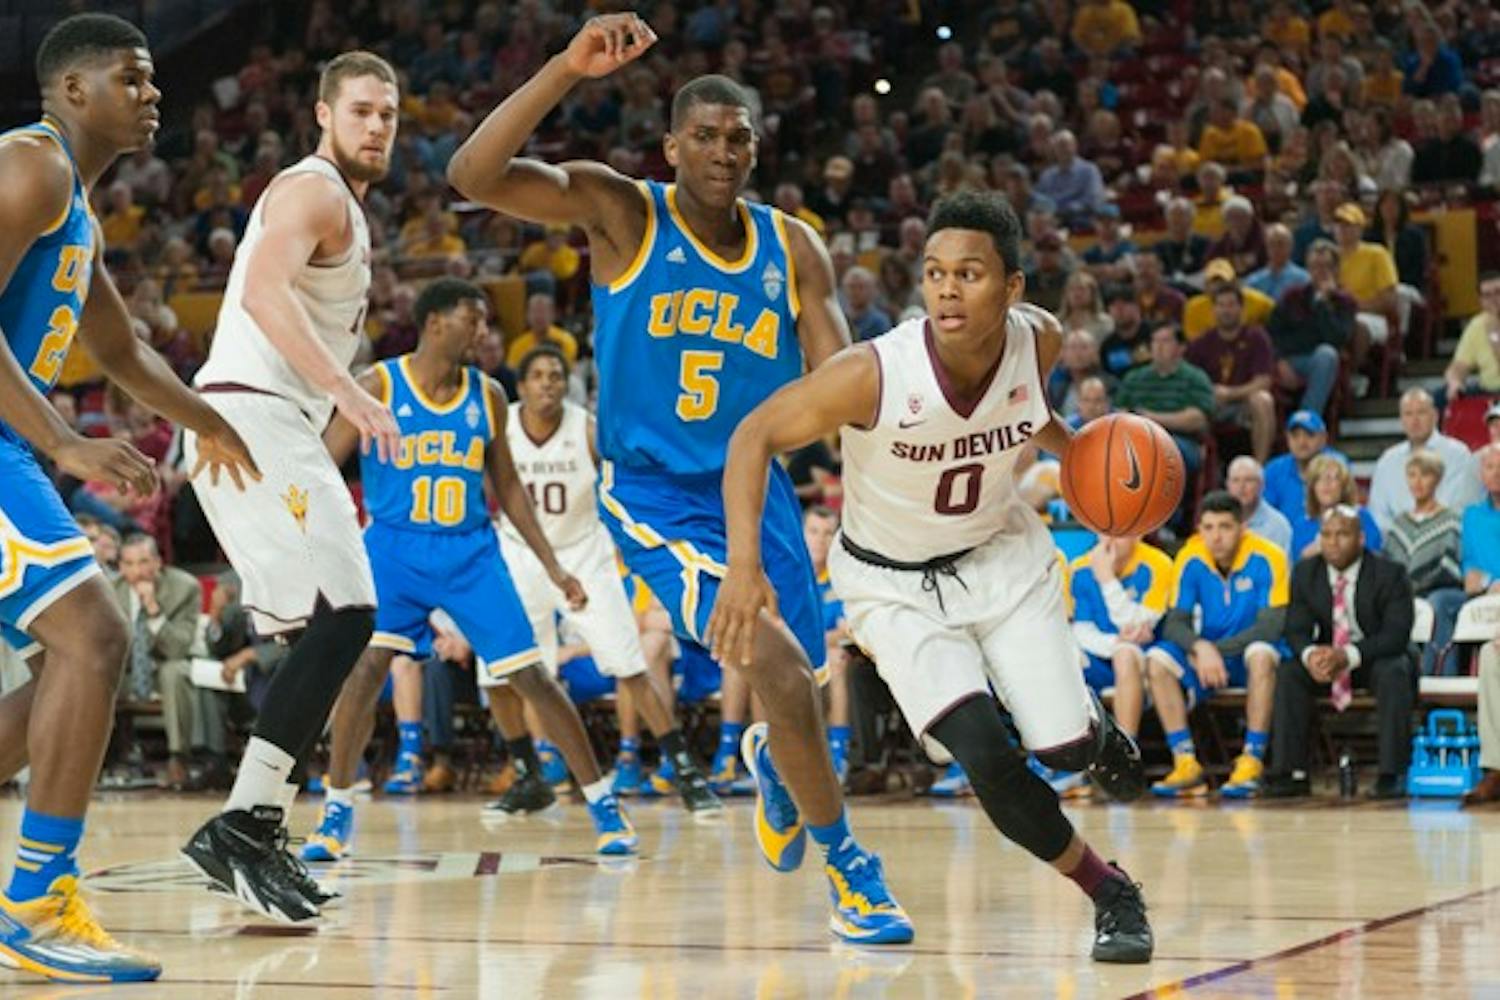 Freshman guard Tra Holder dribbles the ball in a game against UCLA on Wednesday, Feb. 18, 2015, at Wells Fargo Arena in Tempe. The Sun Devils defeated the Bruins 68-66. (Ben Moffat/The State Press)